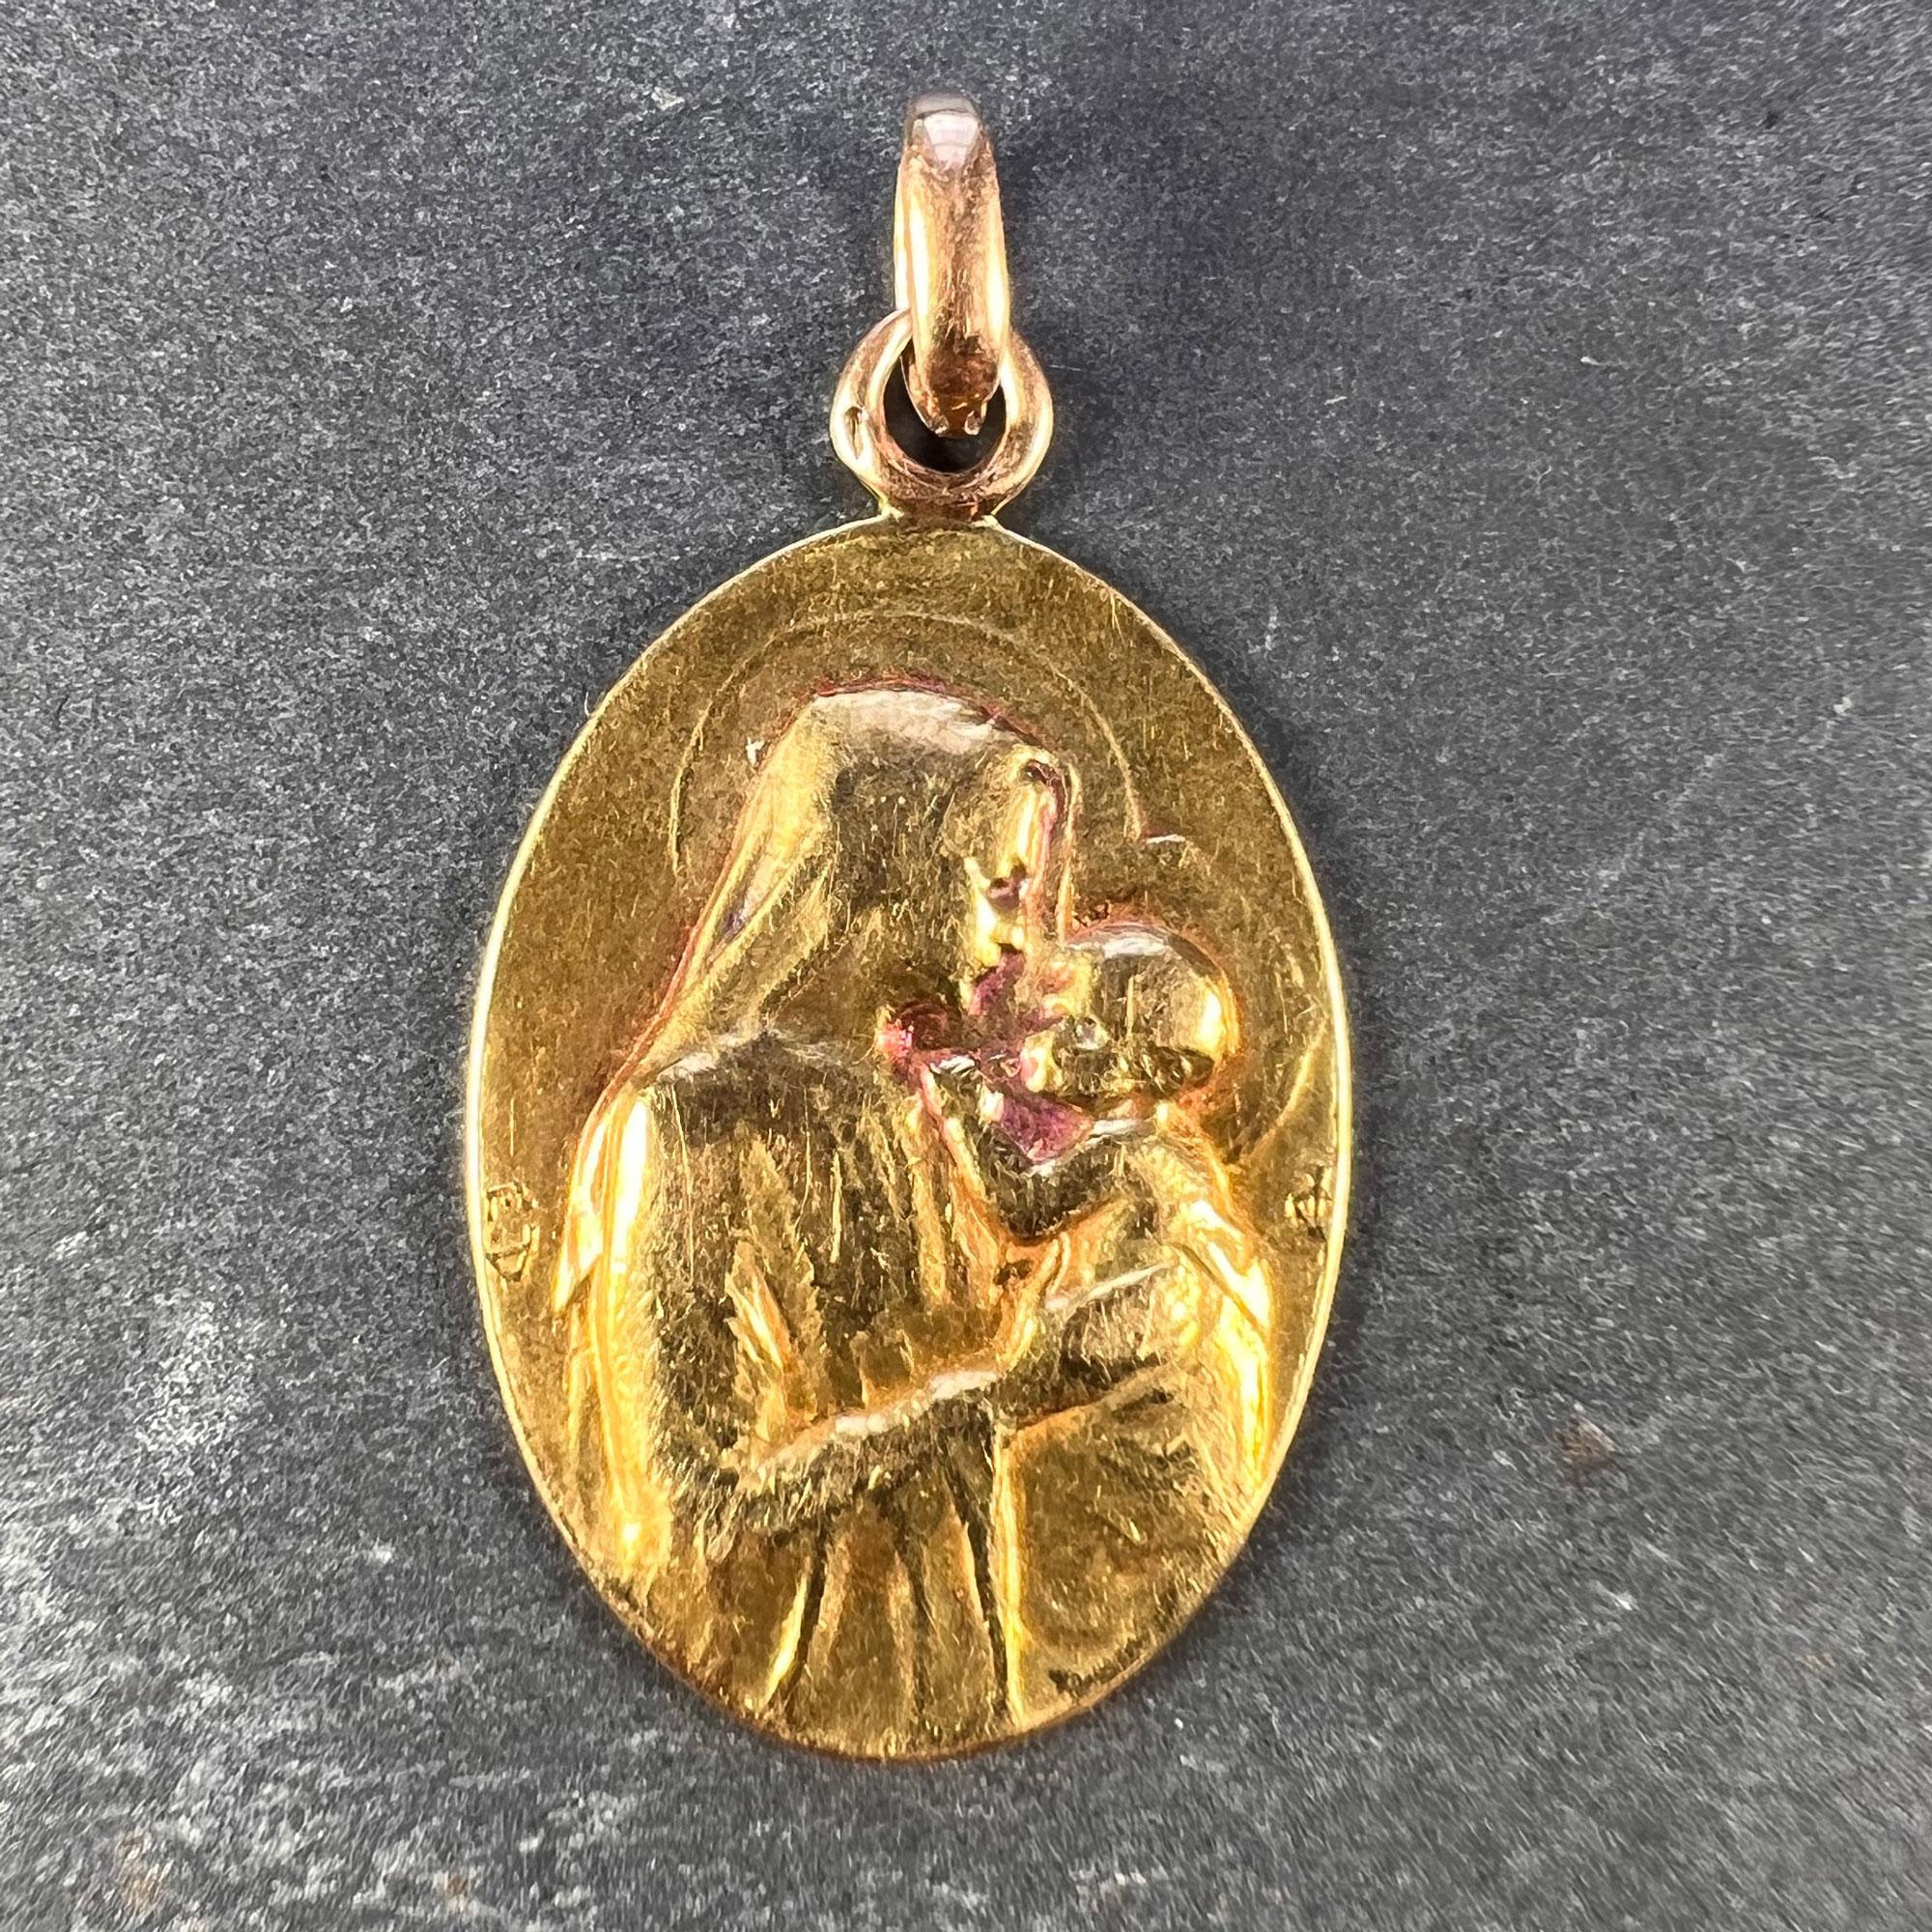 A French 18 karat (18K) yellow gold charm pendant designed as an oval medal depicting the Madonna and Child, signed and initialled by E. Dropsy. The reverse depicts a spray of lilies and the phrase 'Alma Mater' (Nourishing Mother) and is engraved